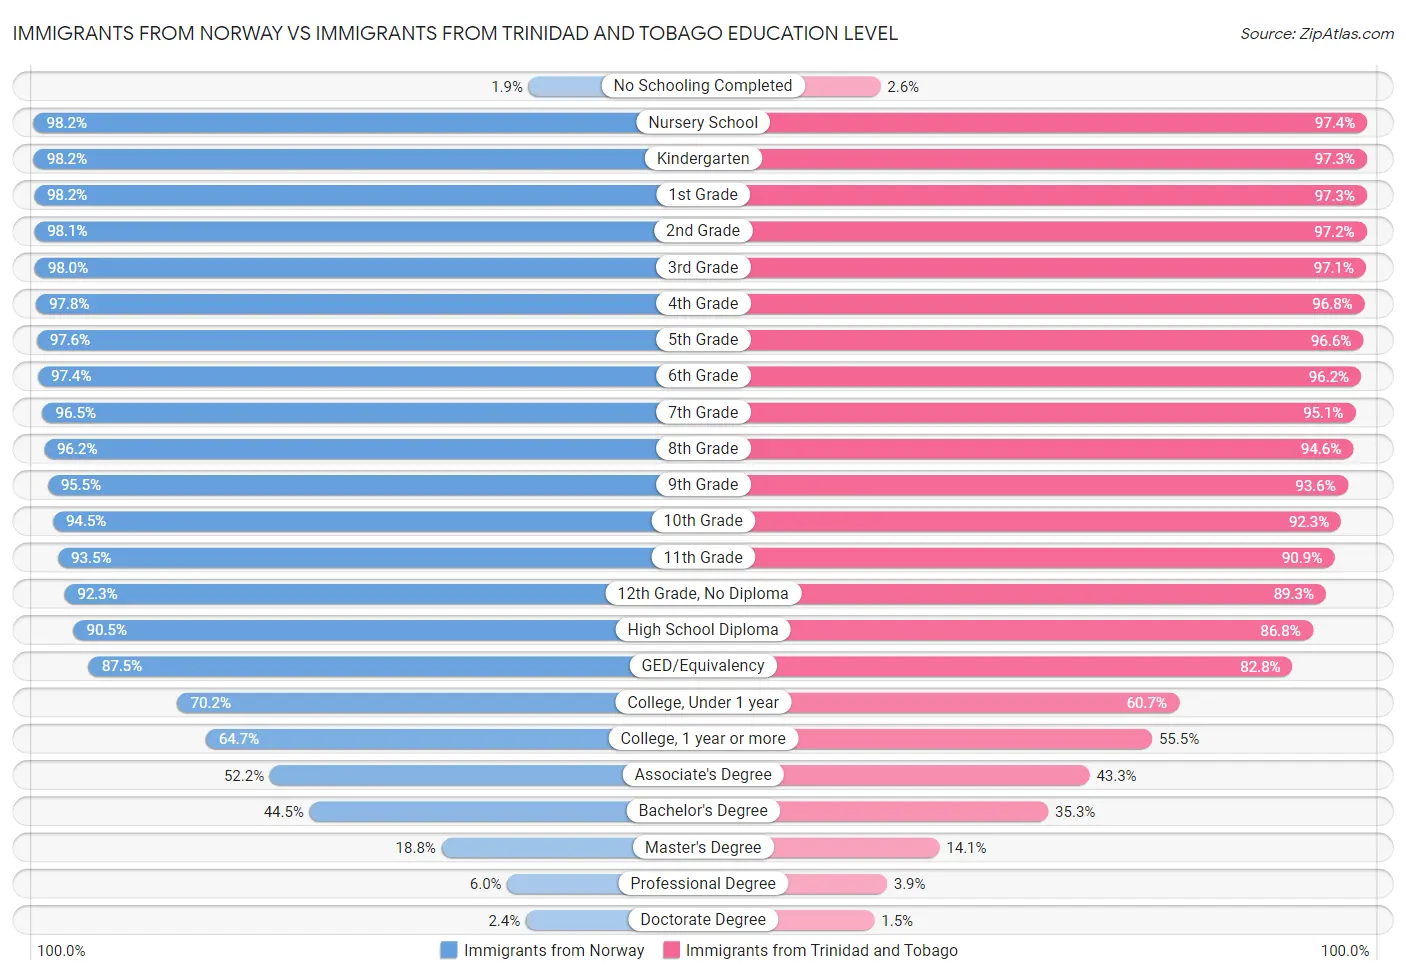 Immigrants from Norway vs Immigrants from Trinidad and Tobago Education Level